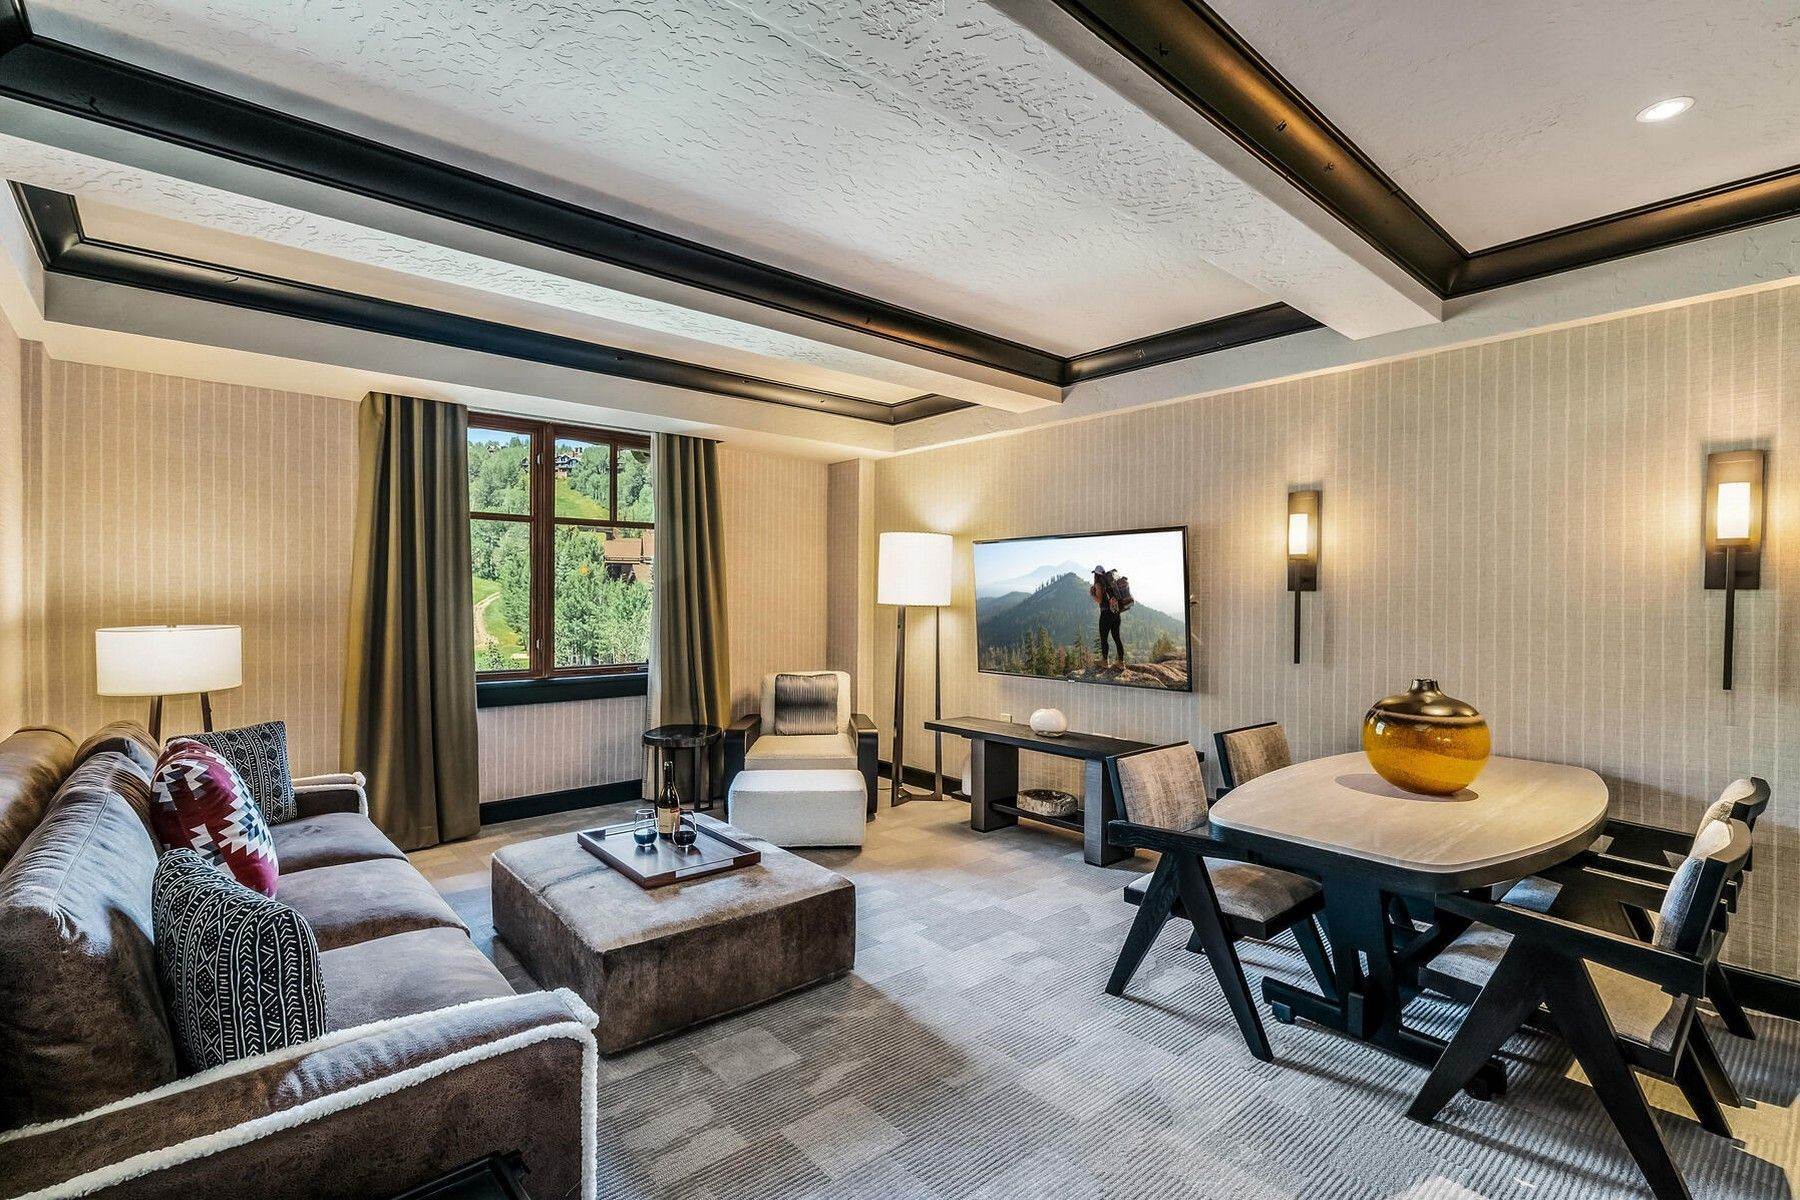 Property for Active at The Ritz-Carlton Residence #HS716 130 Daybreak Ridge Road, HS716 Avon, Colorado 81620 United States